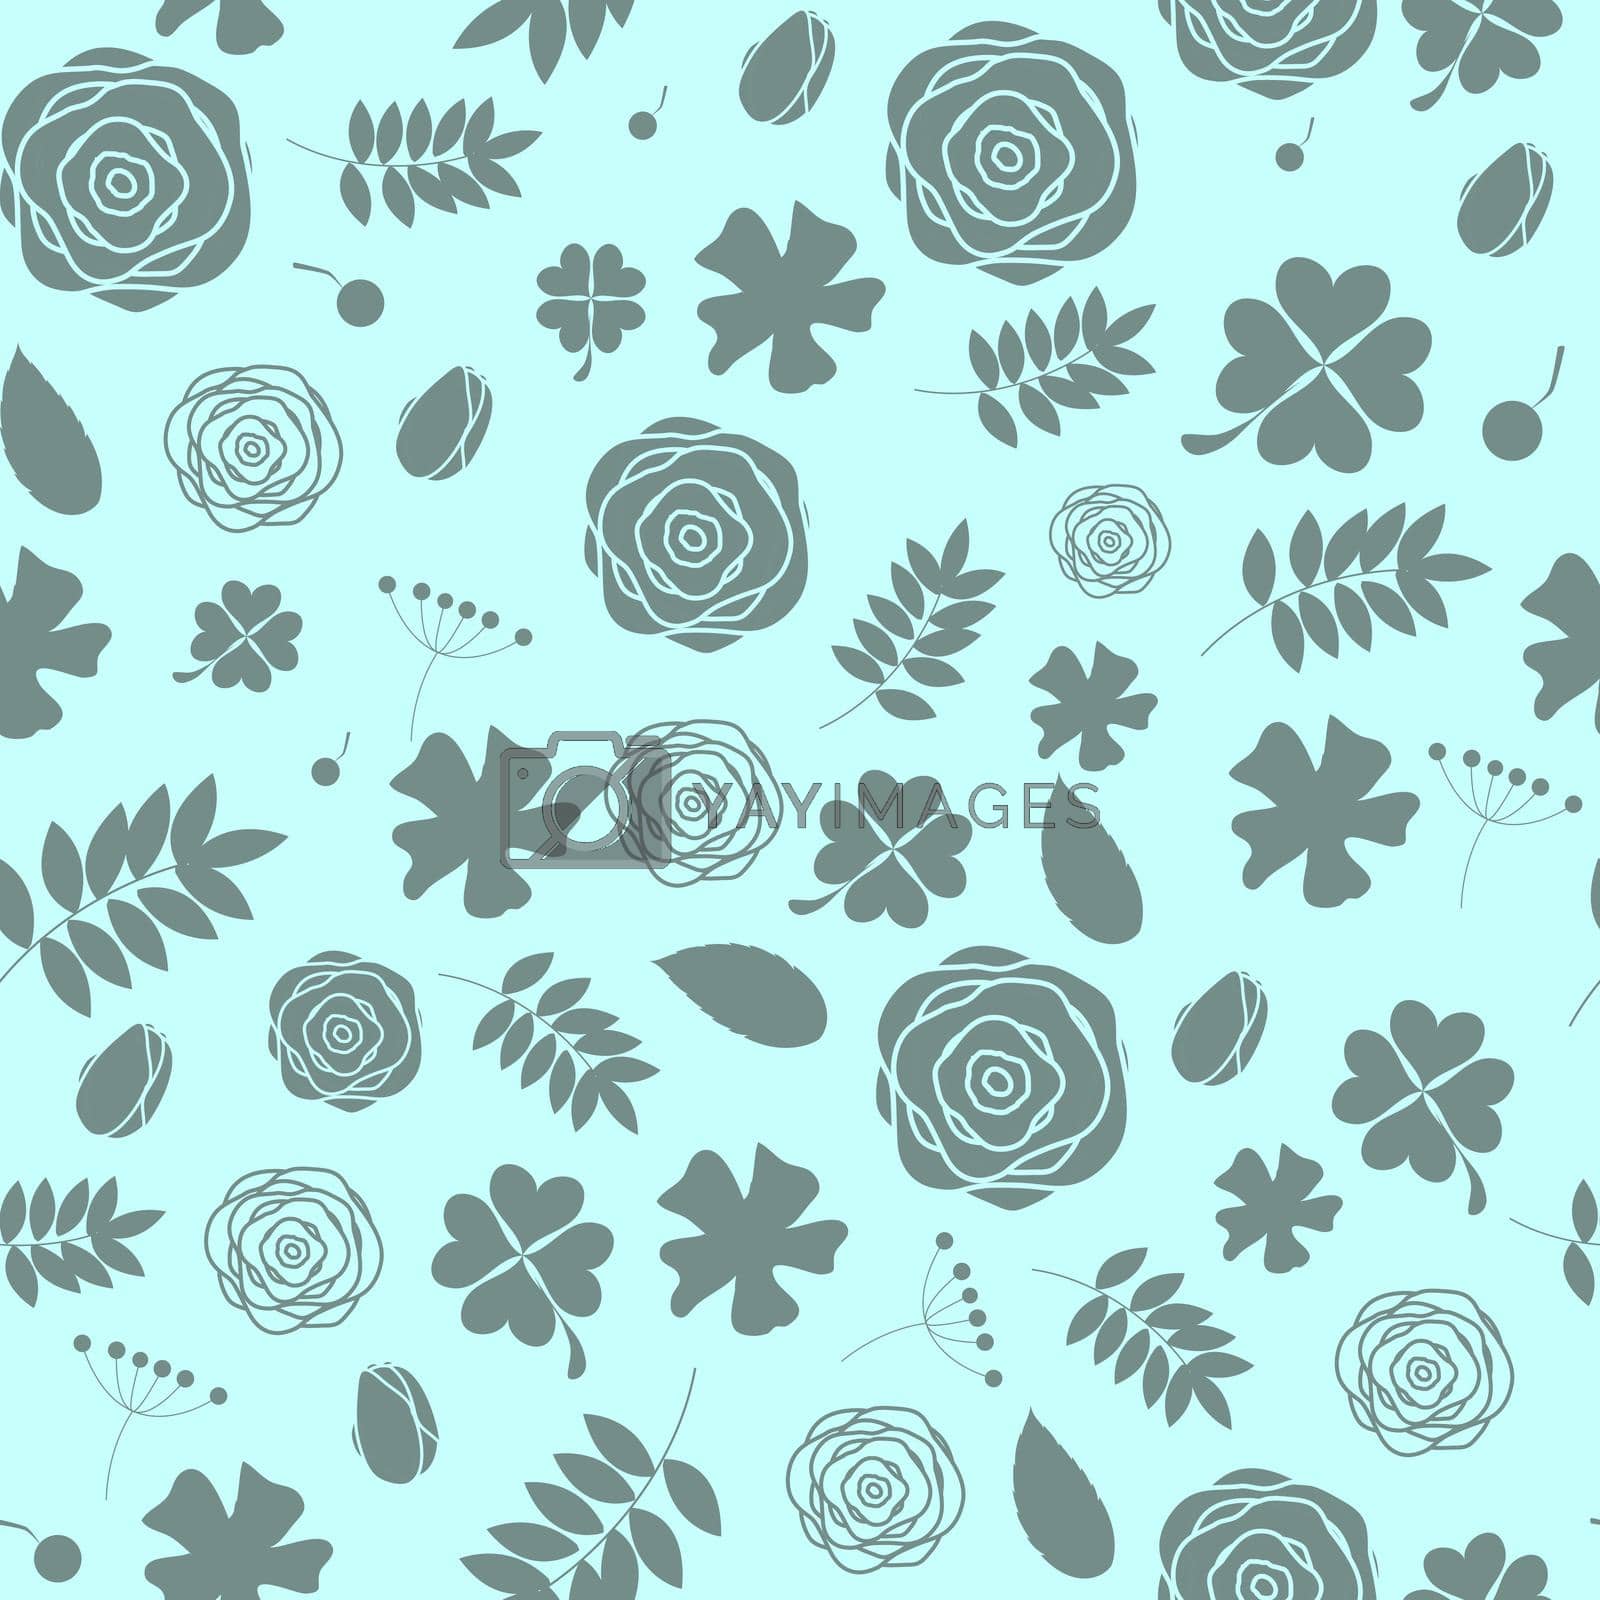 Abstract Natural Flower Seamless Pattern Background Vector Illustration EPS10